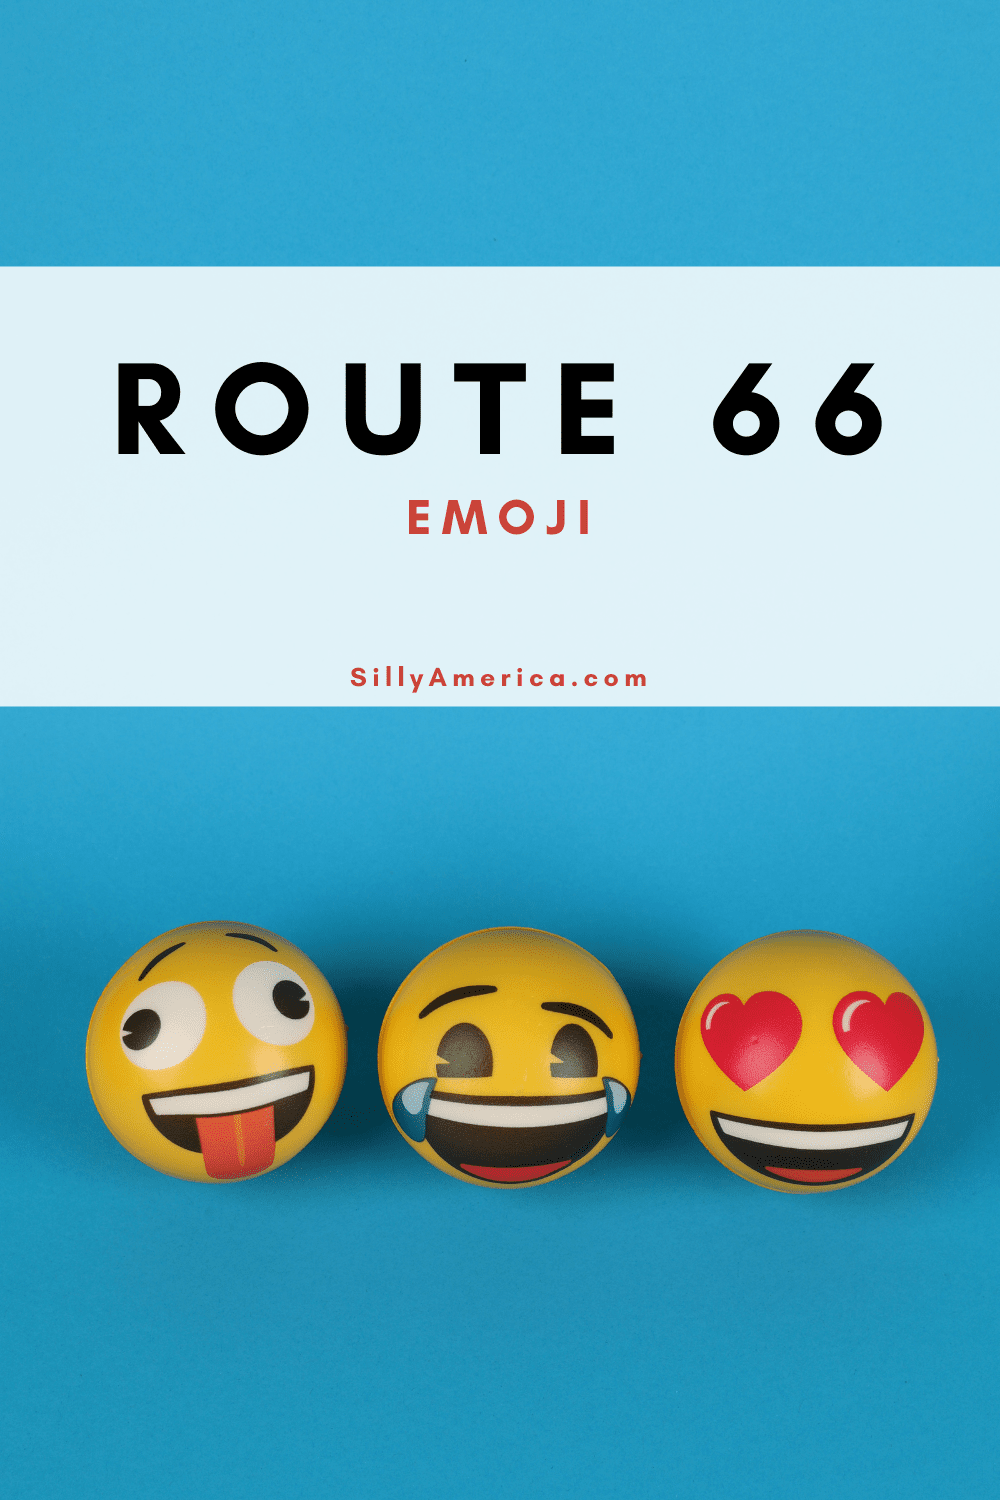 When taking any big road trip you're going to be looking for the perfect emoji to spice up your social media captions about your trip. So if you're driving the Mother Road you're probably looking for the best Route 66 emoji to use to represent your trip on Instagram or on Twitter or in texts. Here are some of the best Route 66 emoji you can use for your road trip. #Emoji #Route66 #Route66Emoji #Route66RoadTrip #RoadTrip #RoadTripPlanning